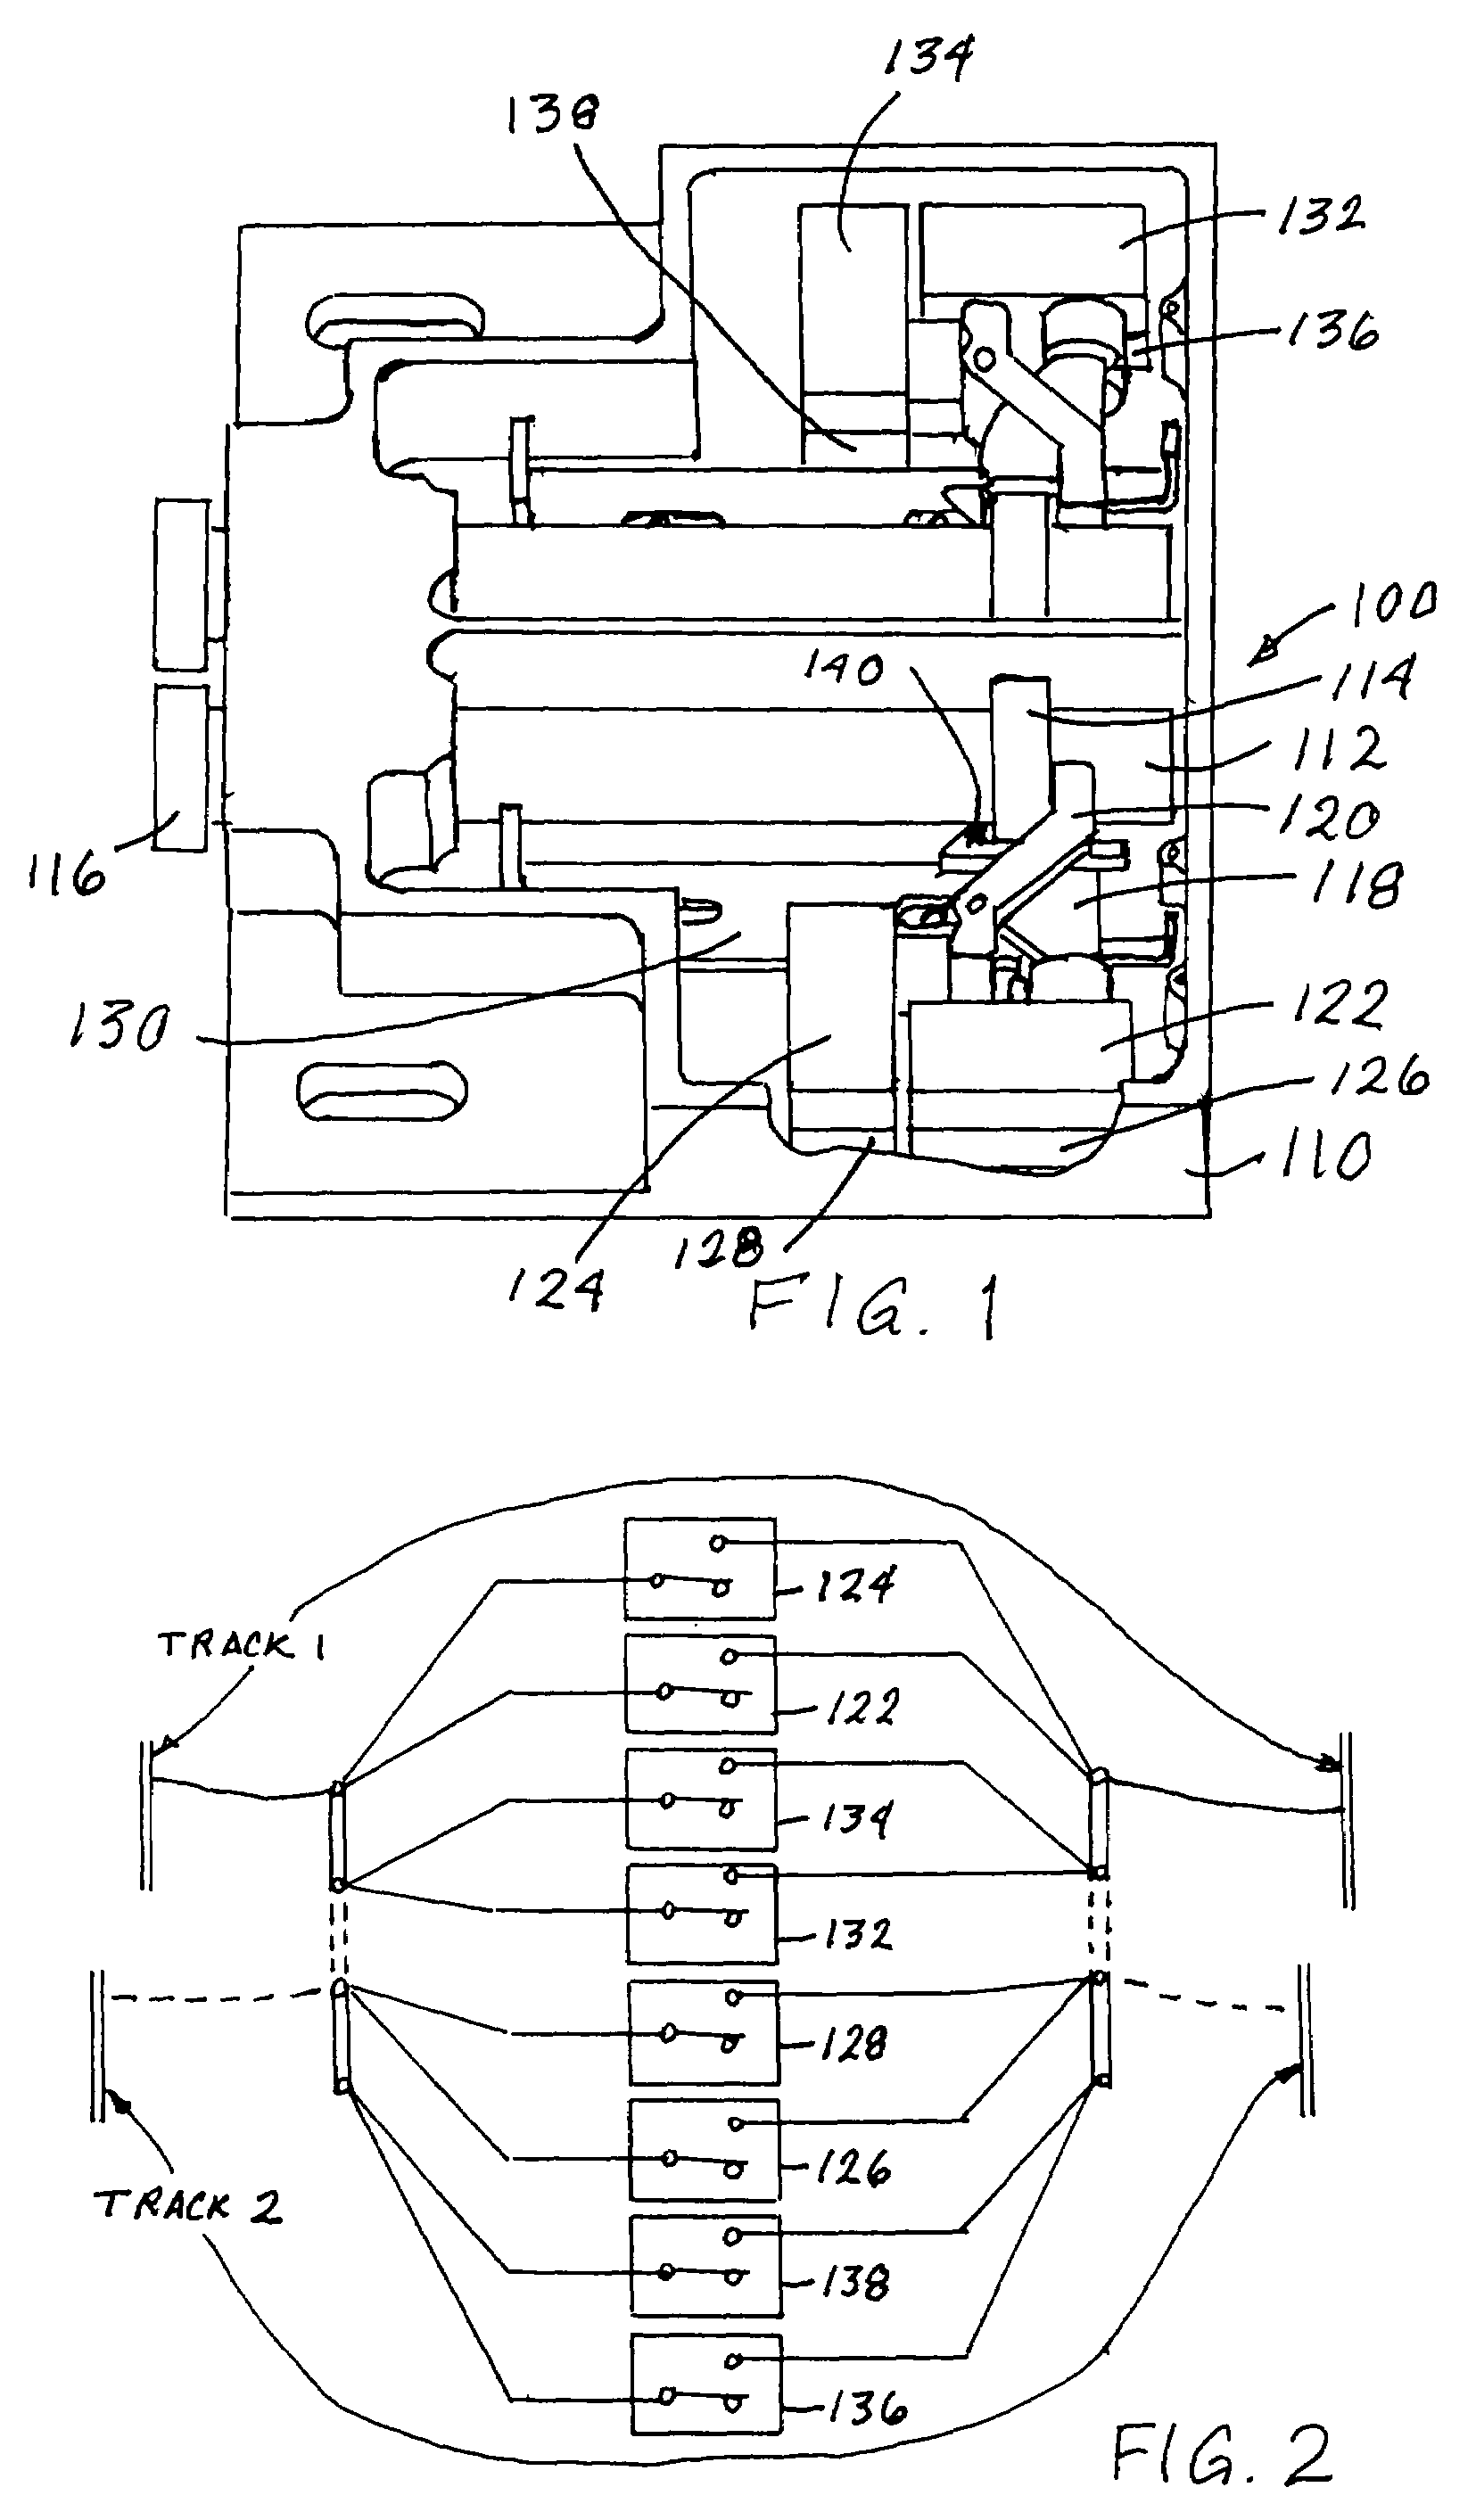 Non-powered trailed switch detector for railroad track switching equipment